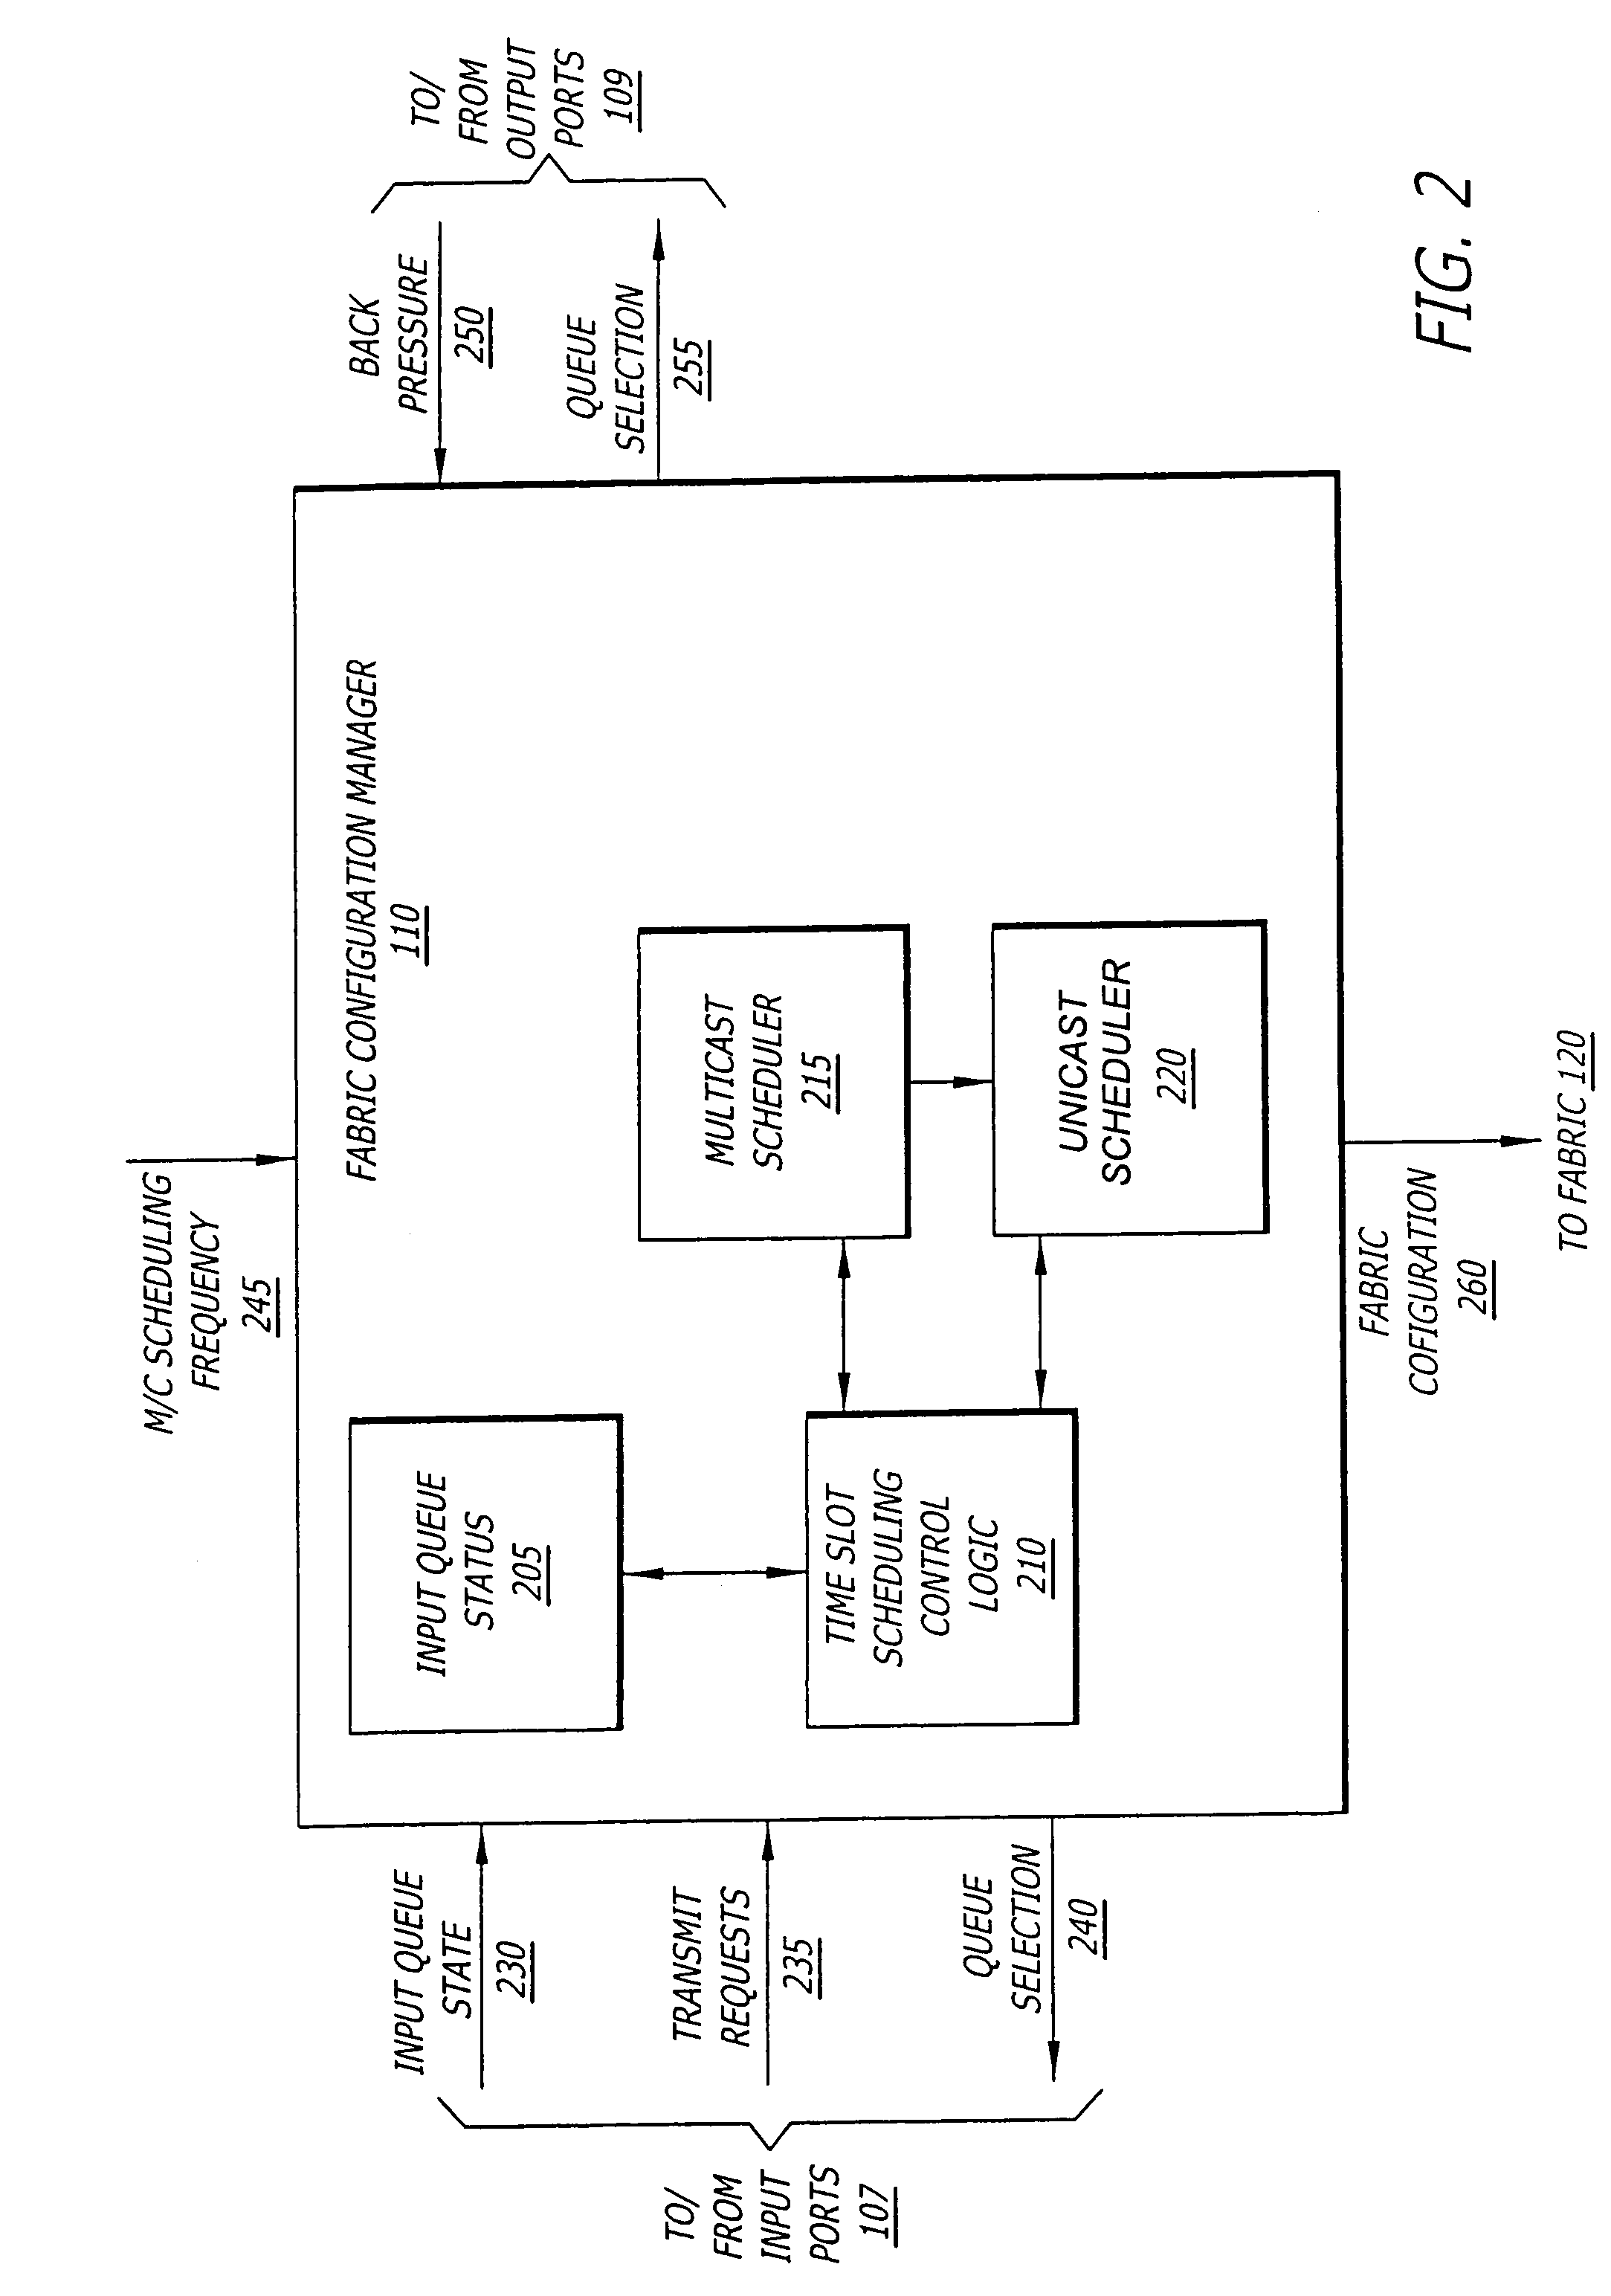 Multicast and unicast scheduling for a network device